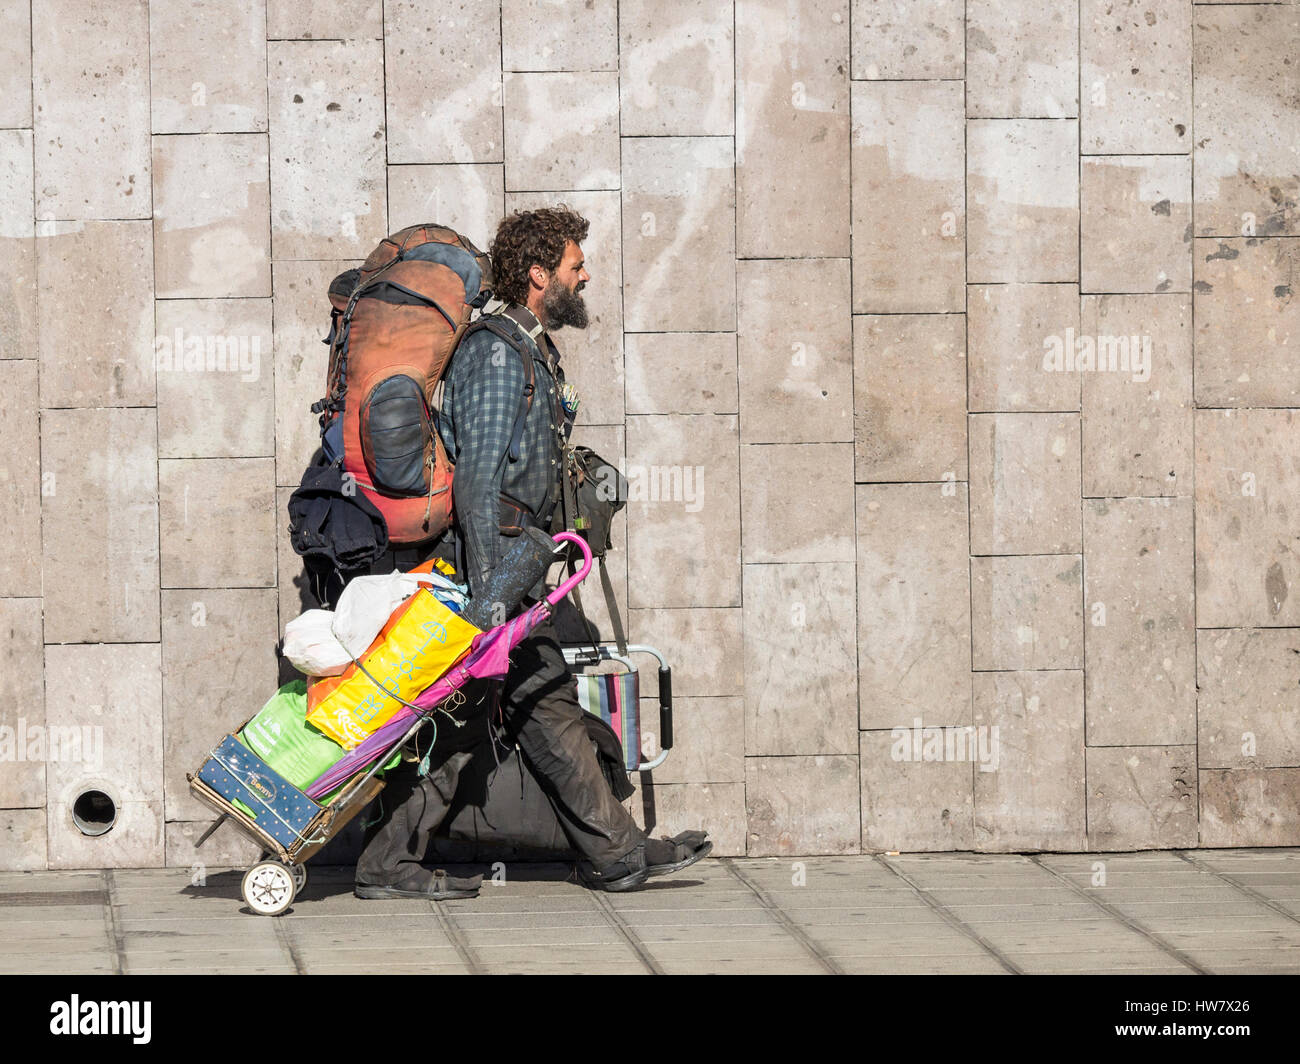 Homeless man in dirty clothes with large rucksack. Stock Photo